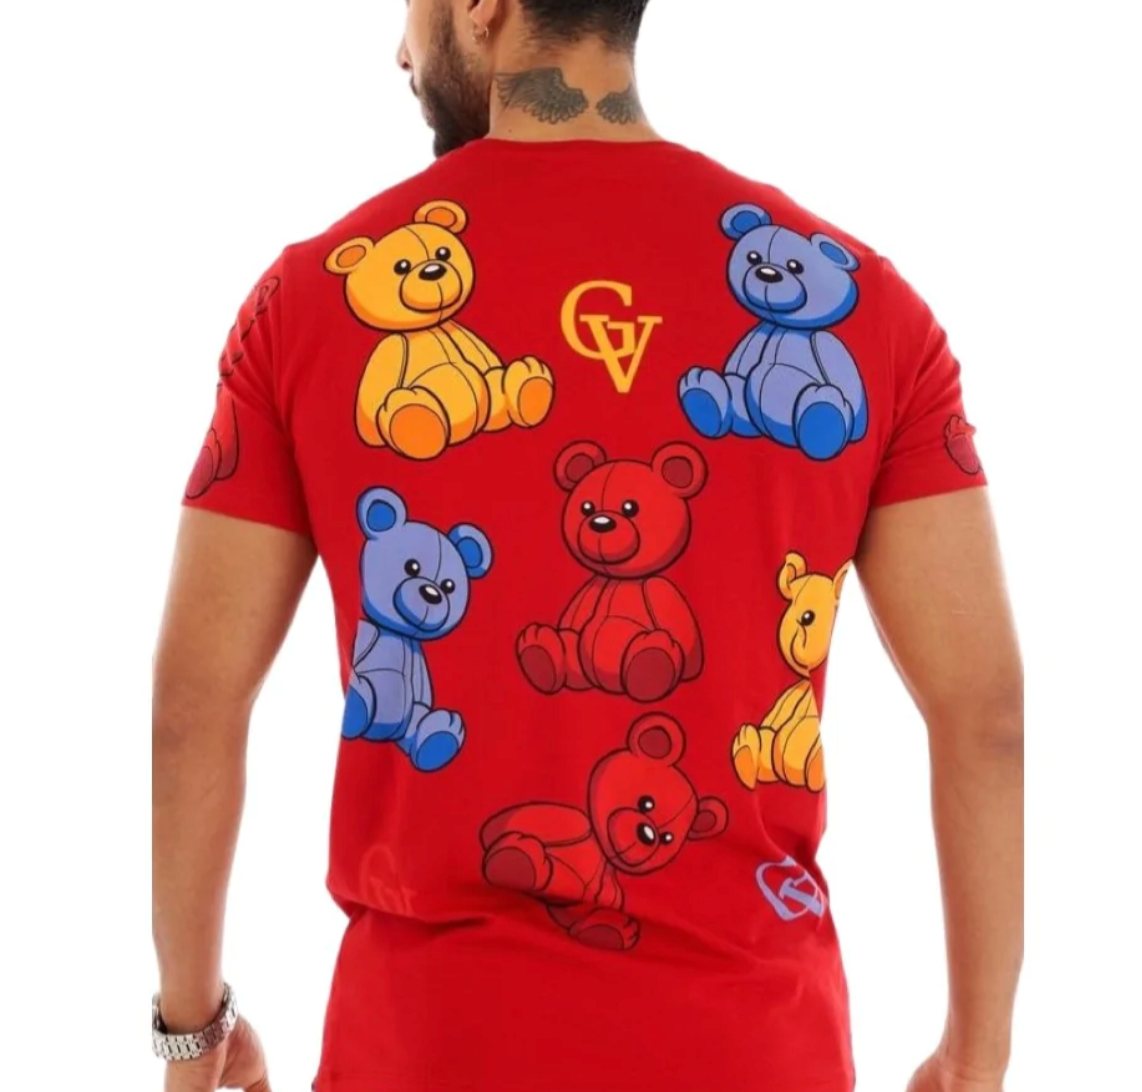 George V Stunning crewneck red t-shirt. Multi colour teddy bear all over print. Perfect to wear on a daily basis.